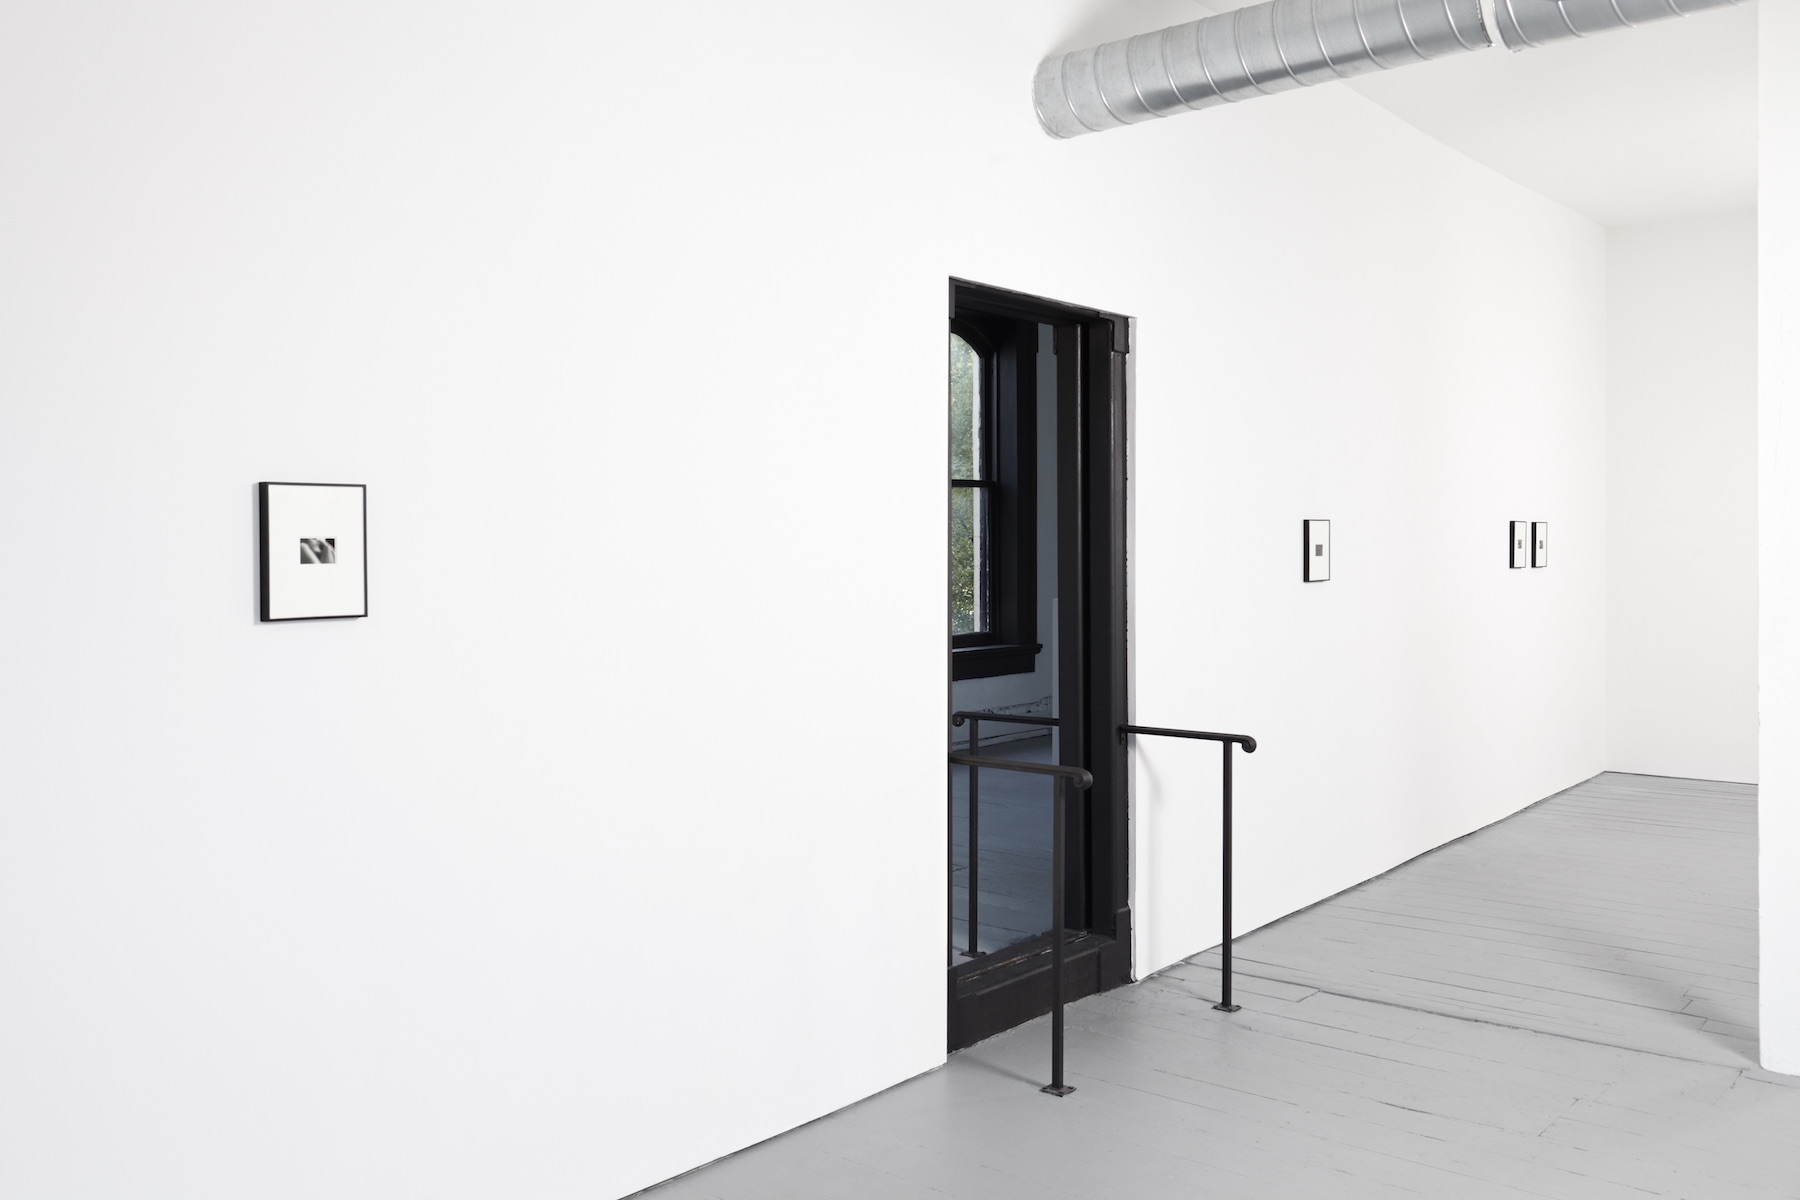 A white room with small images on the wall and a door leading into another room.